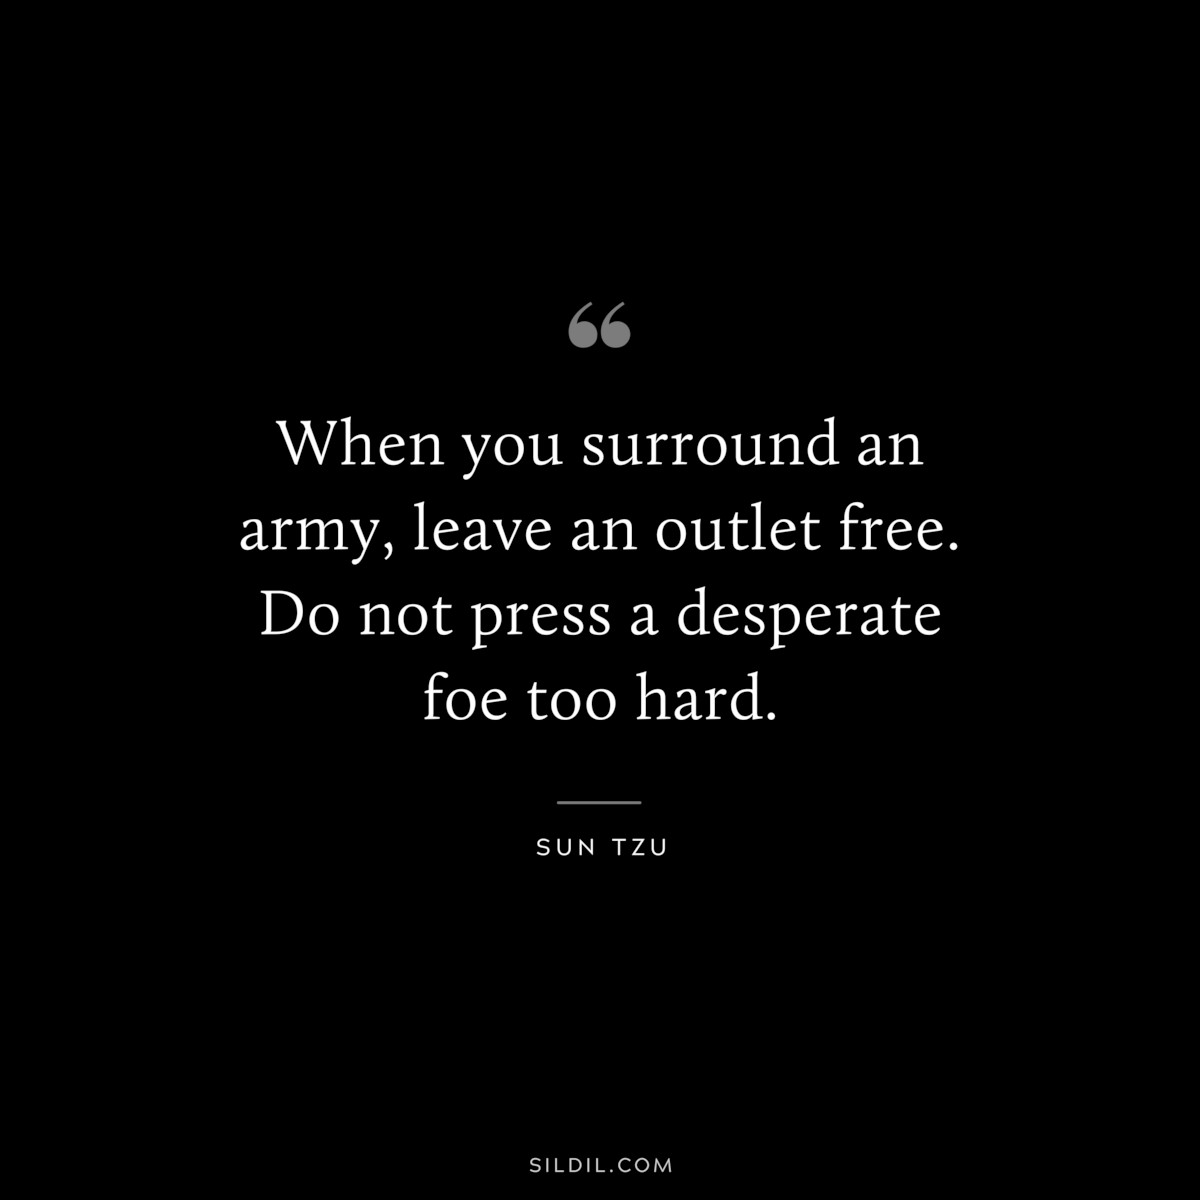 When you surround an army, leave an outlet free. Do not press a desperate foe too hard.― Sun Tzu